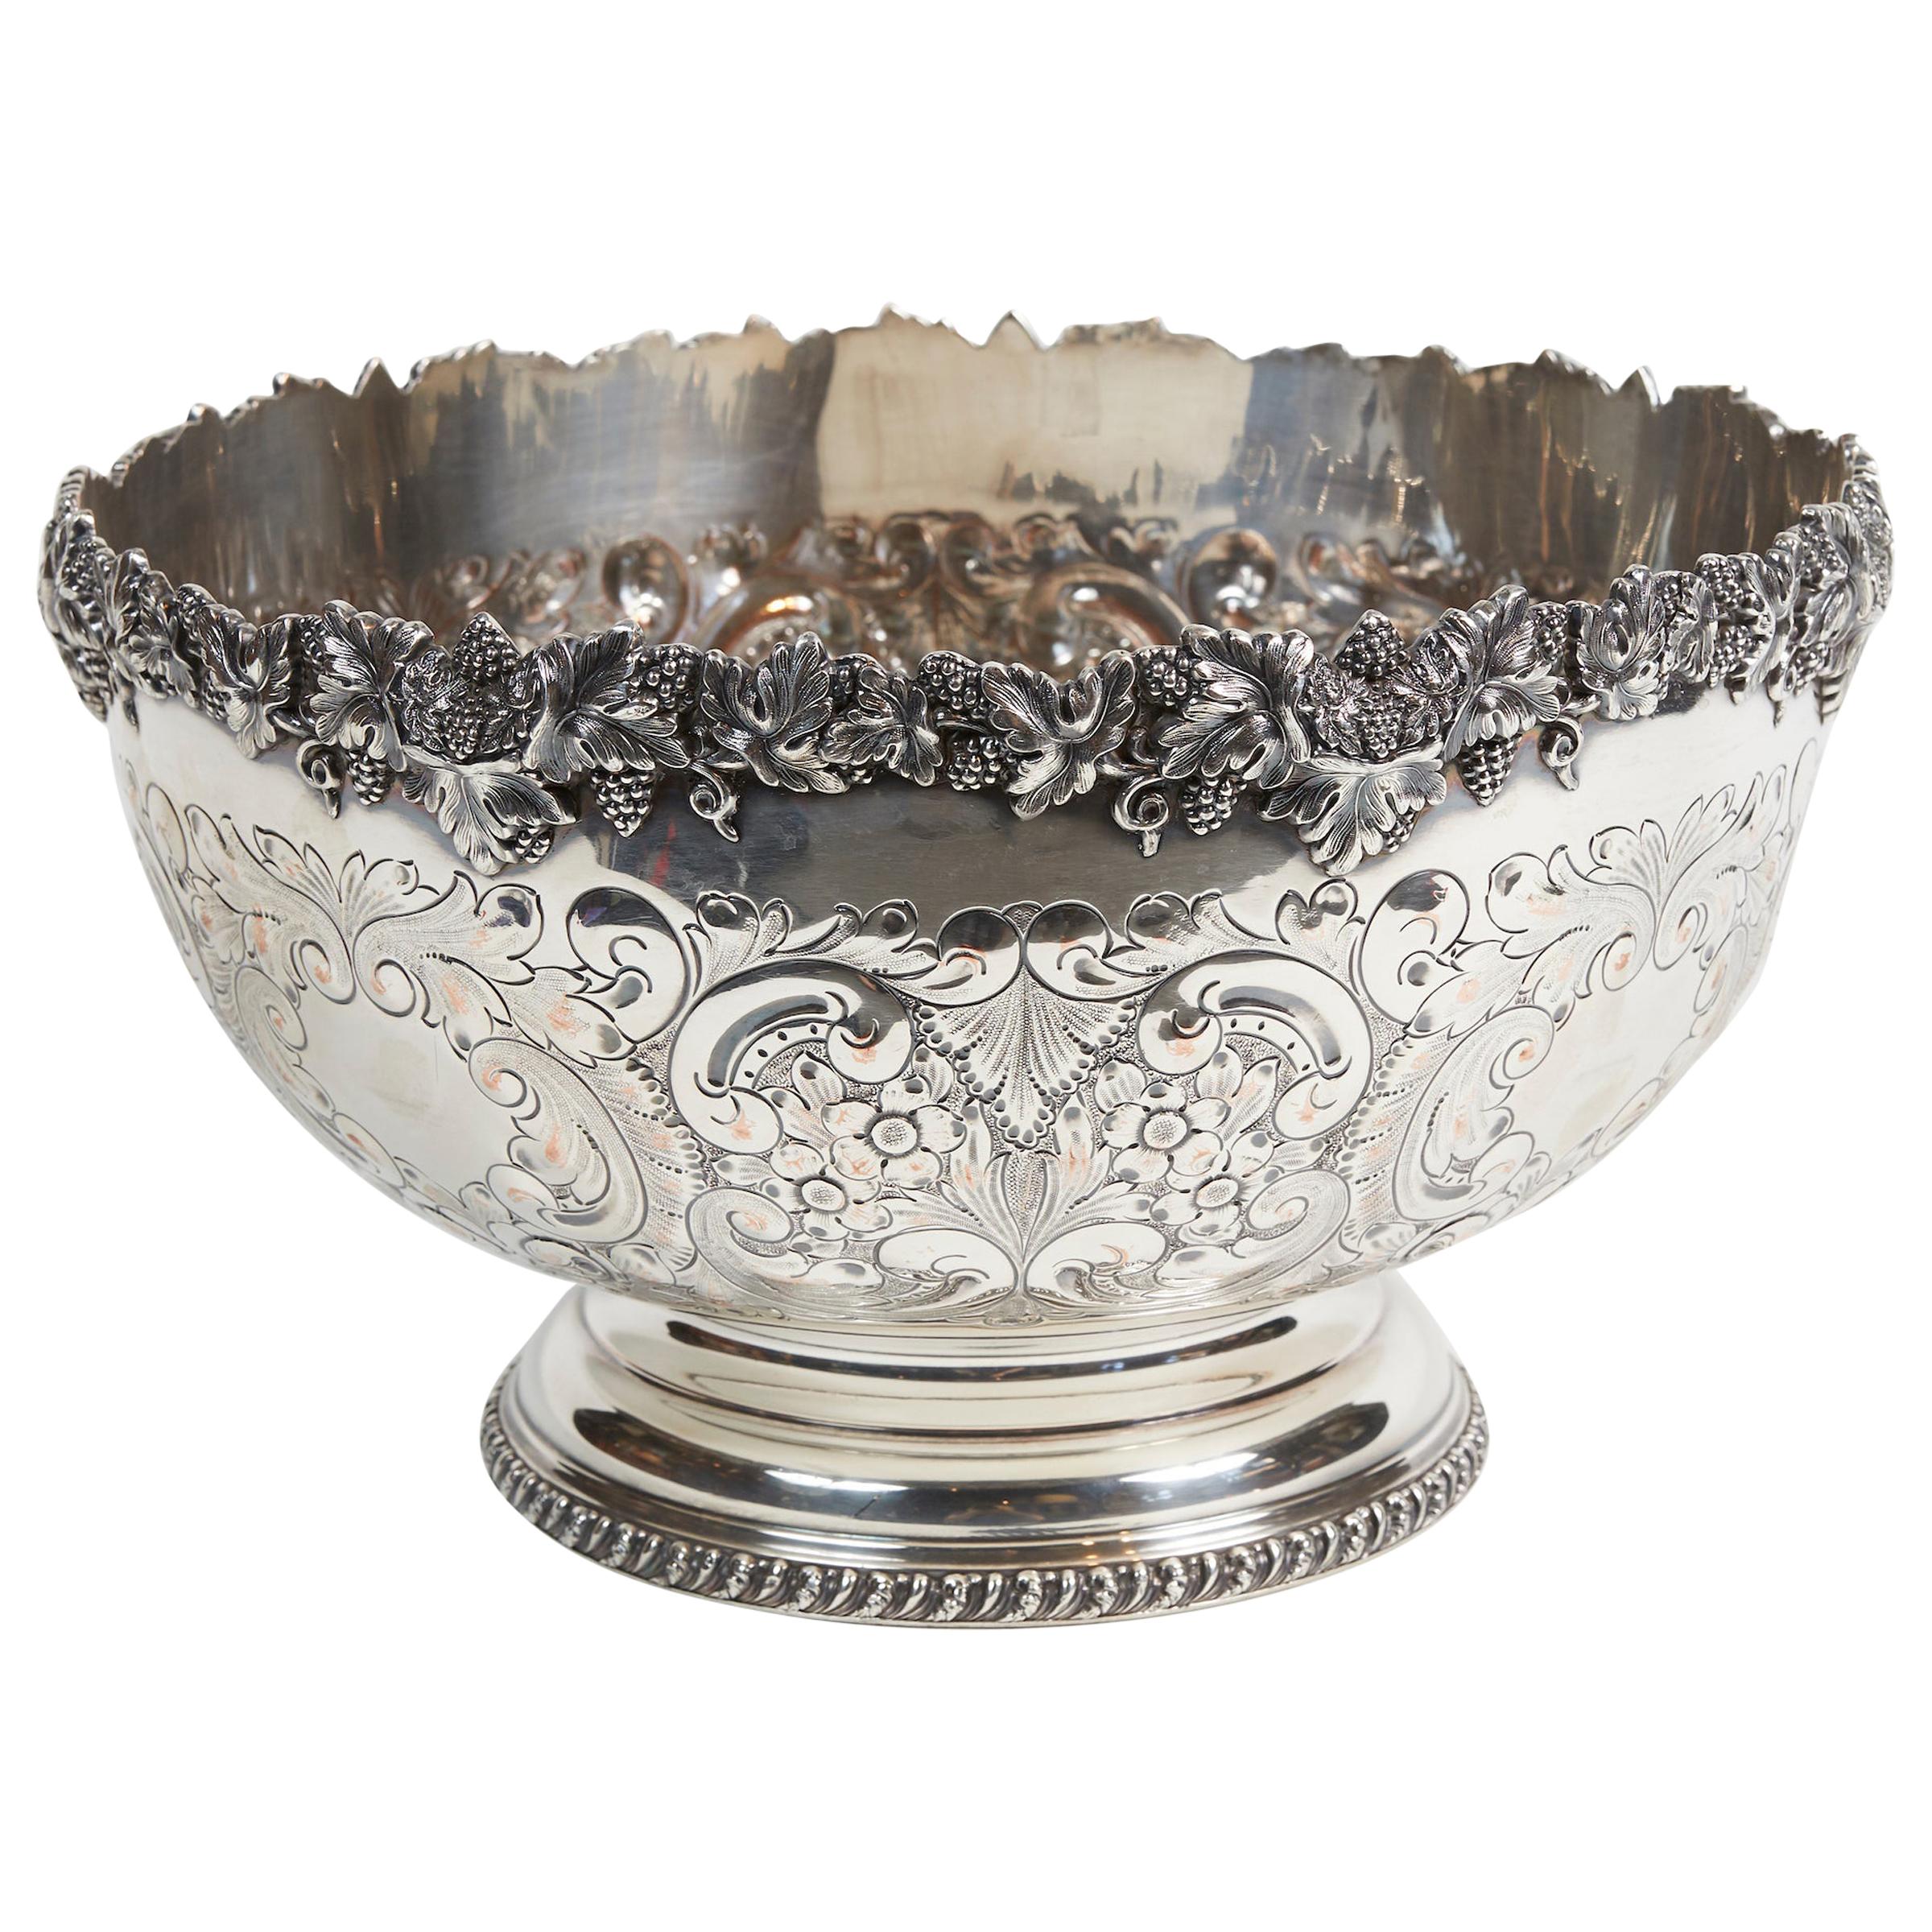 https://a.1stdibscdn.com/large-silver-plat-repousse-punch-bowl-by-ellis-barker-silver-co-for-sale/1121189/f_159769611575102383989/15976961_master.jpg